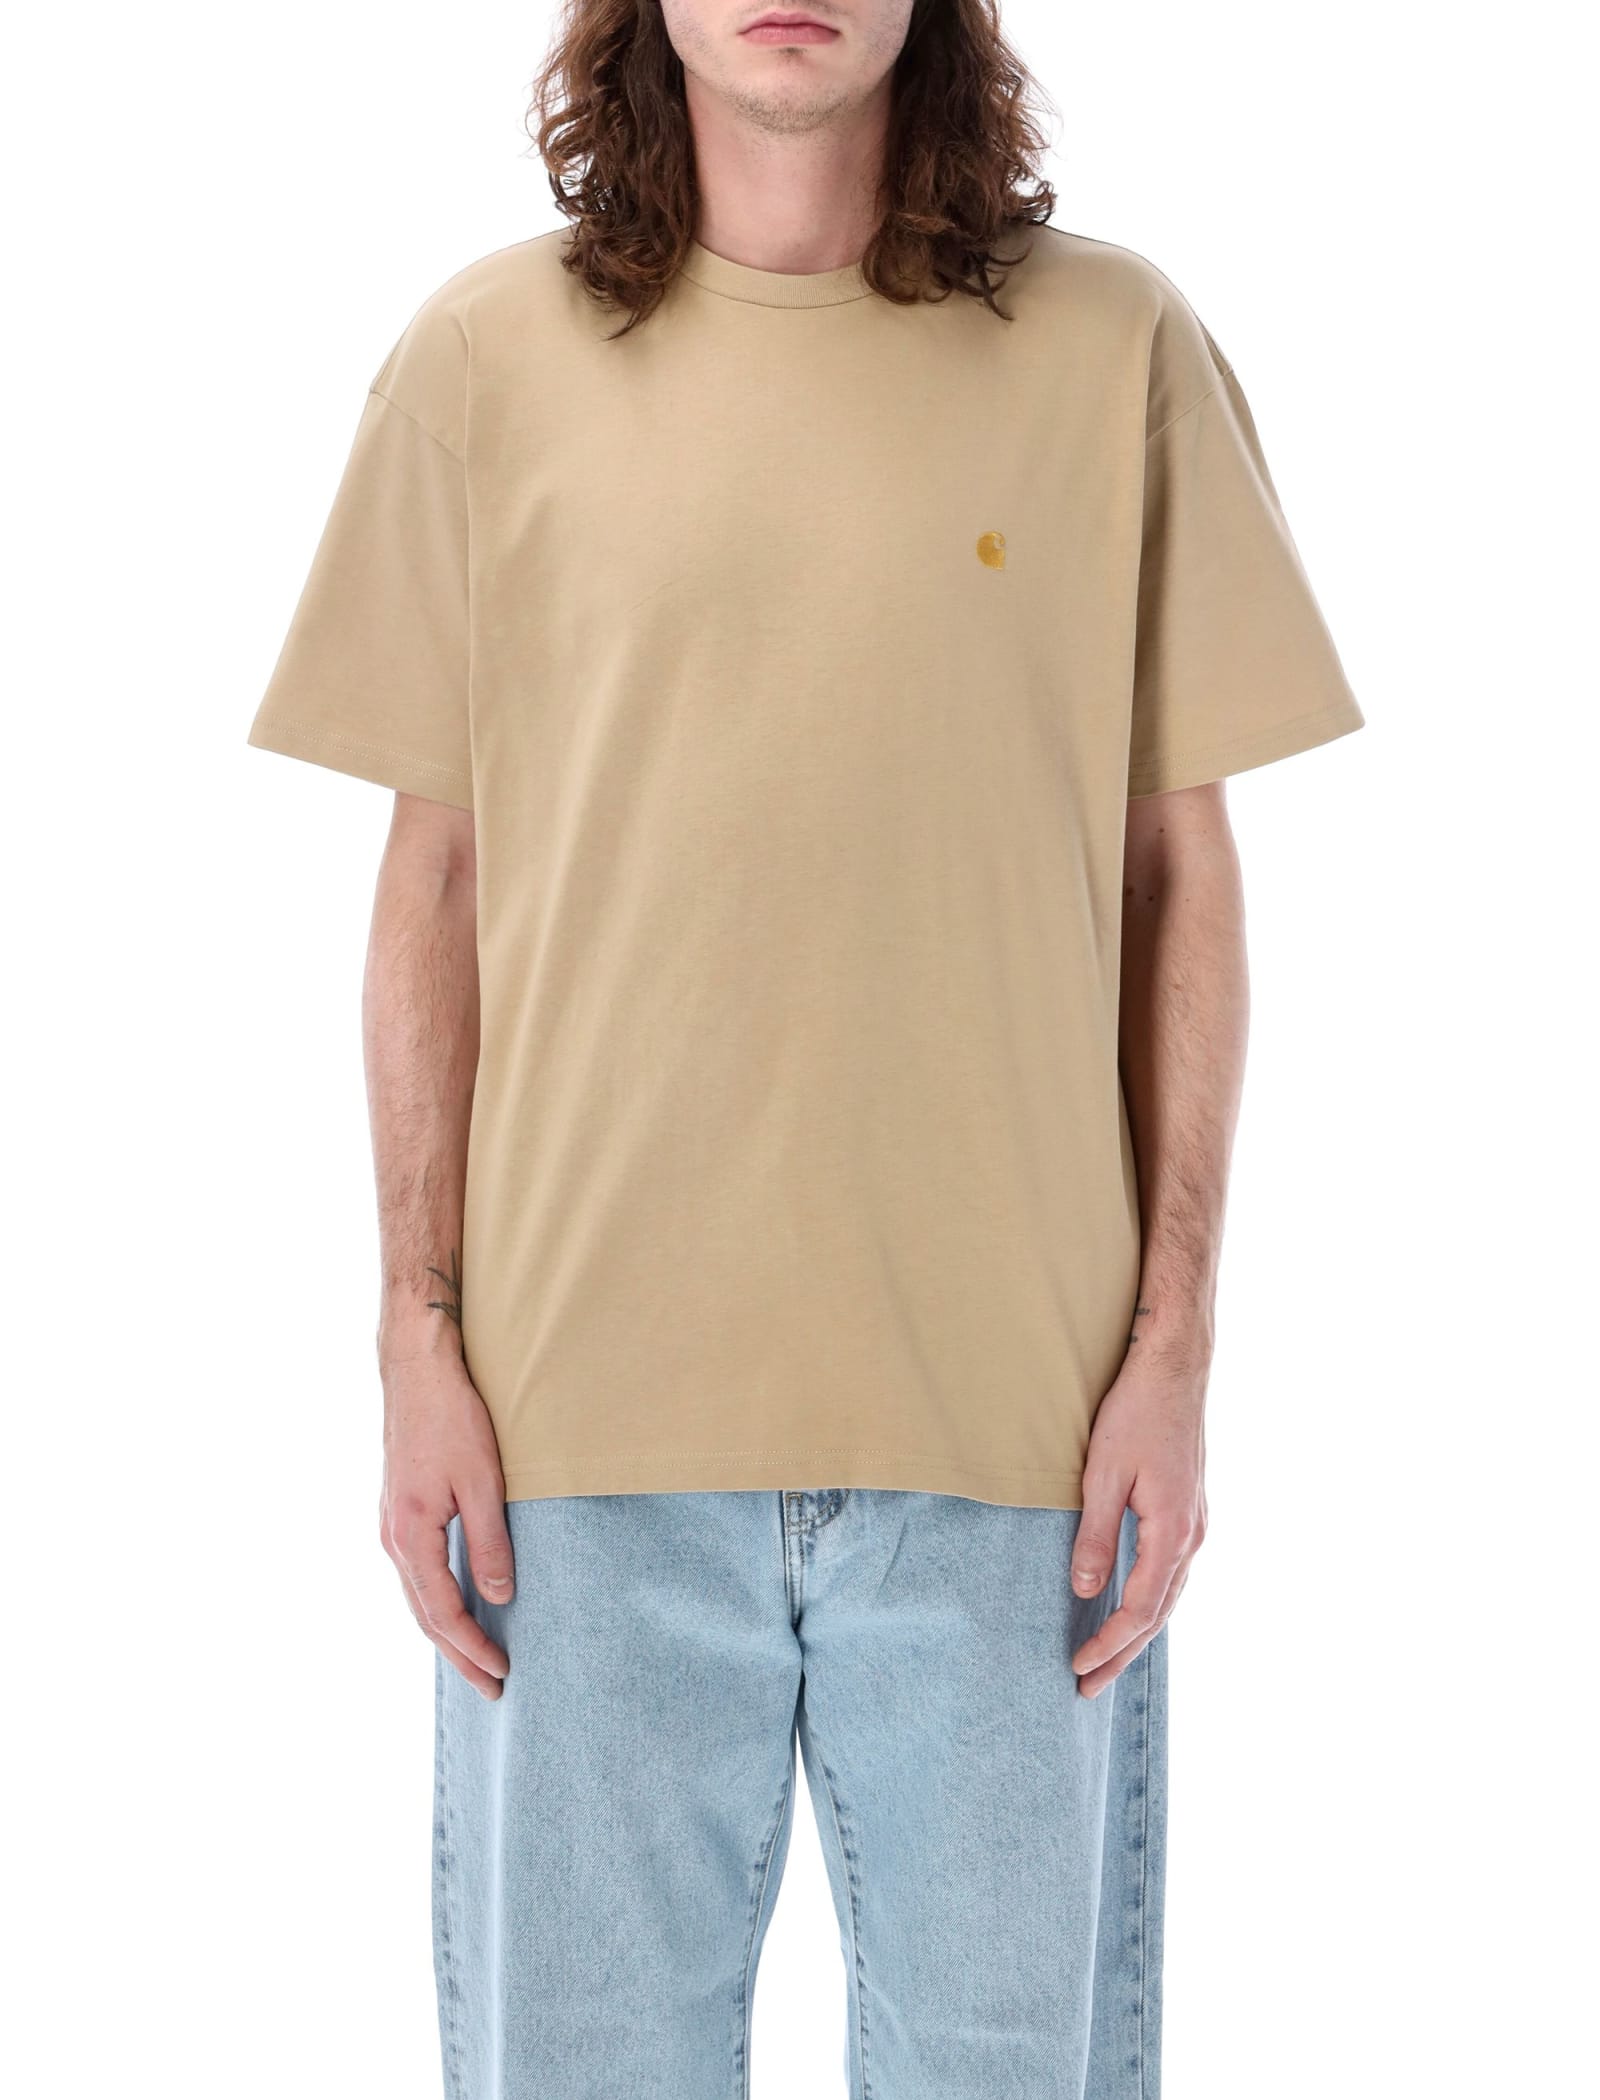 Chase S/s T-shirt